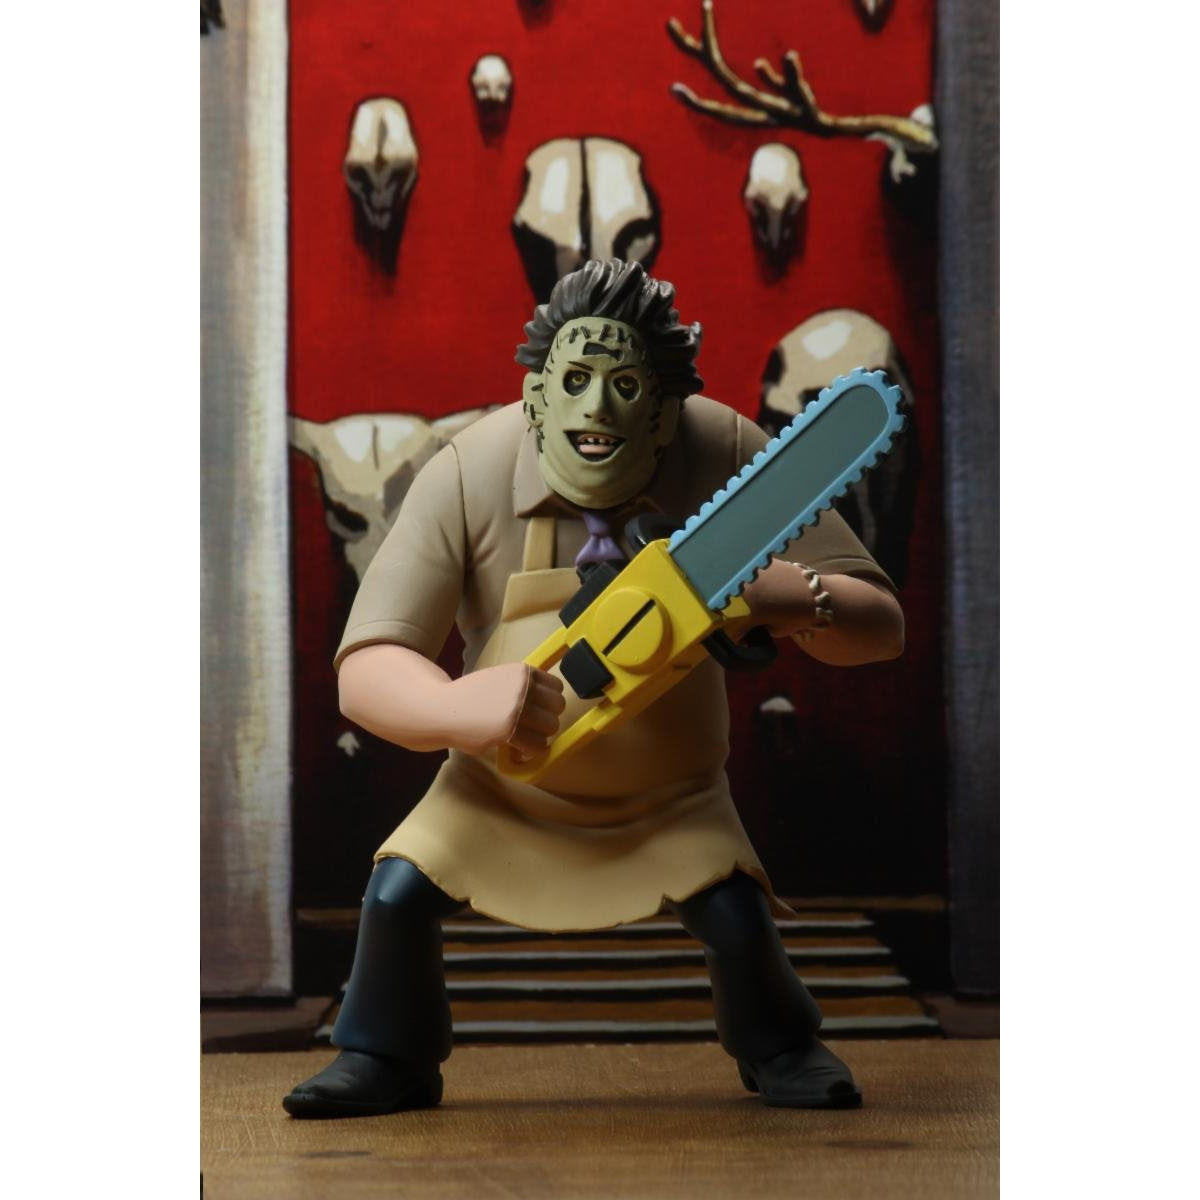 Image of Toony Terrors - 6" Action Figures - Series 2 - Leatherface (Texas Chainsaw Massacre)